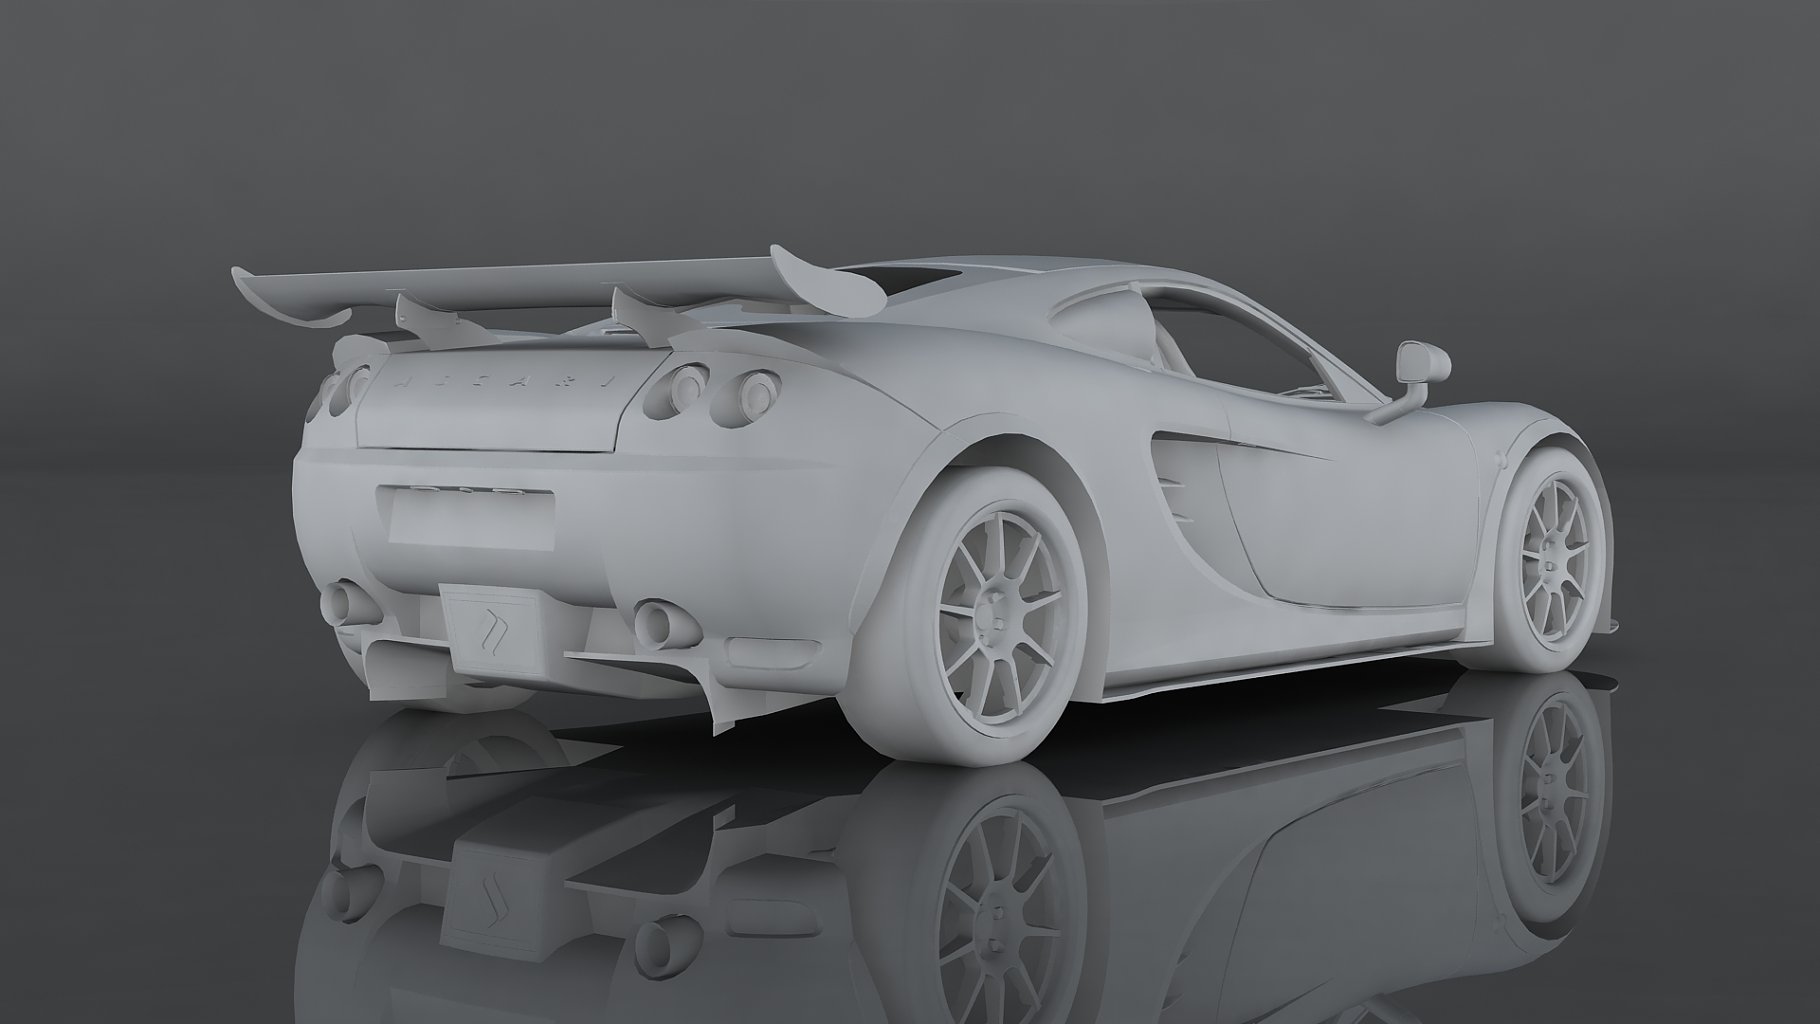 Gray ascari kz1r low poly 3d model back right graphic mockup.